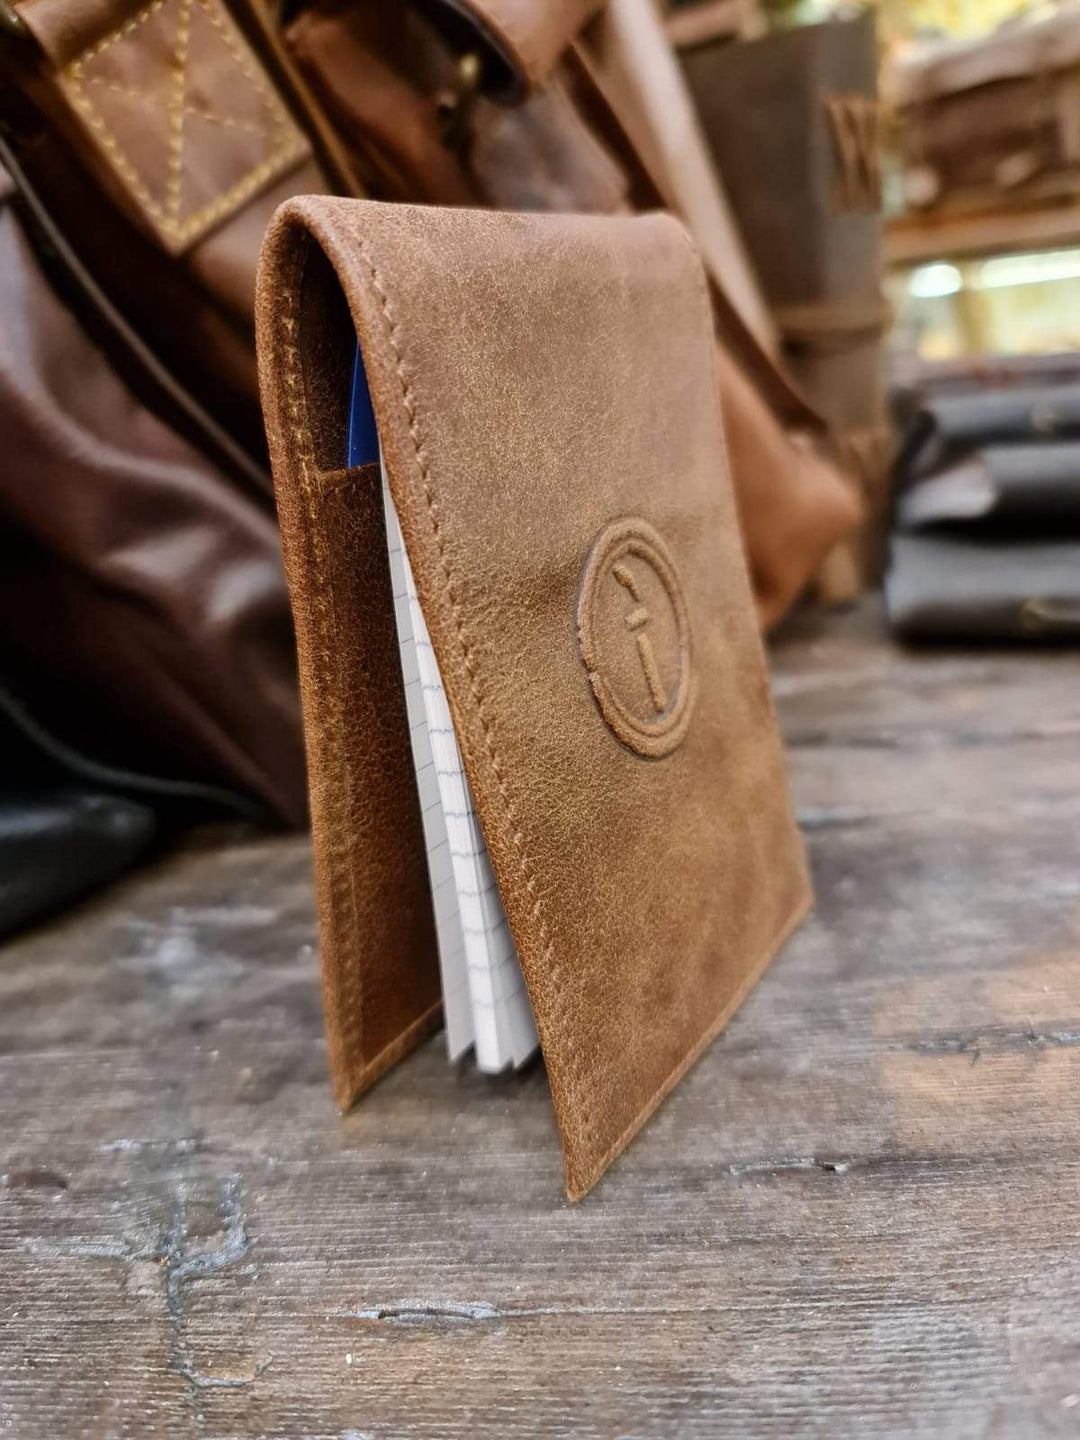 Indepal Leather JOURNAL Crazy Horse Tan Leather Notebook Cover - pocket book